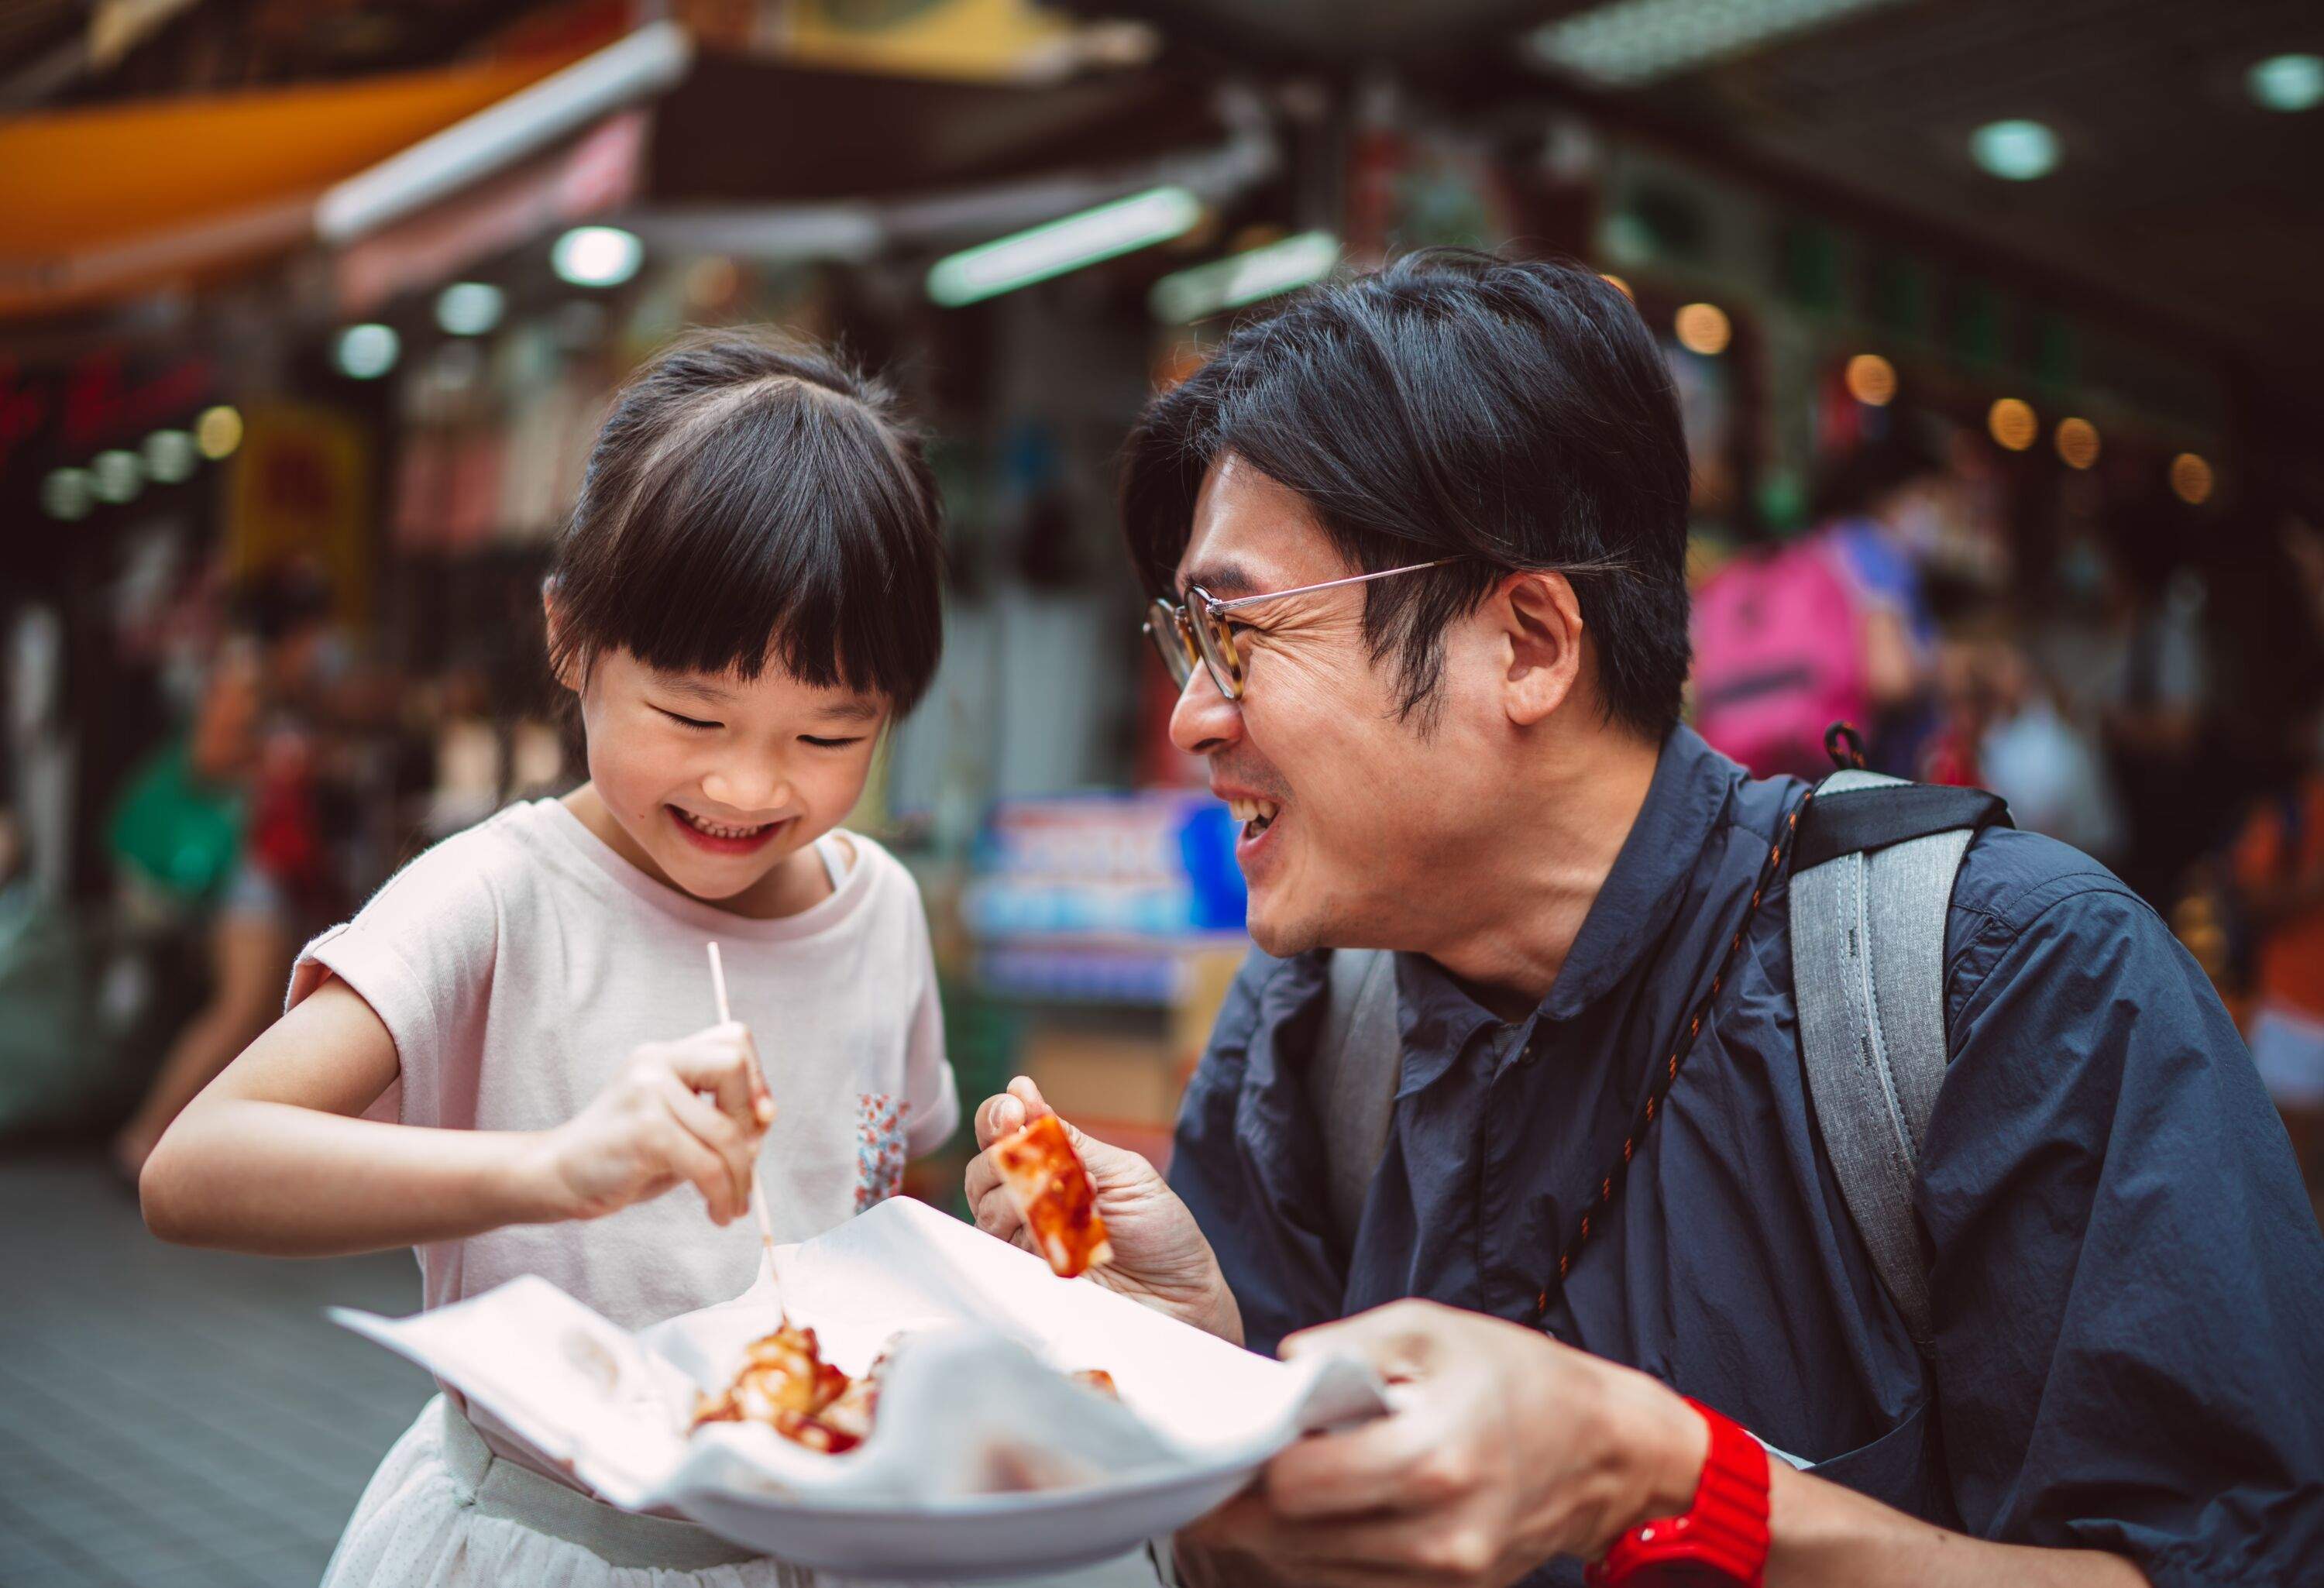 Lovely little girl enjoying Hong Kong local street food with her young handsome dad joyfully in street.